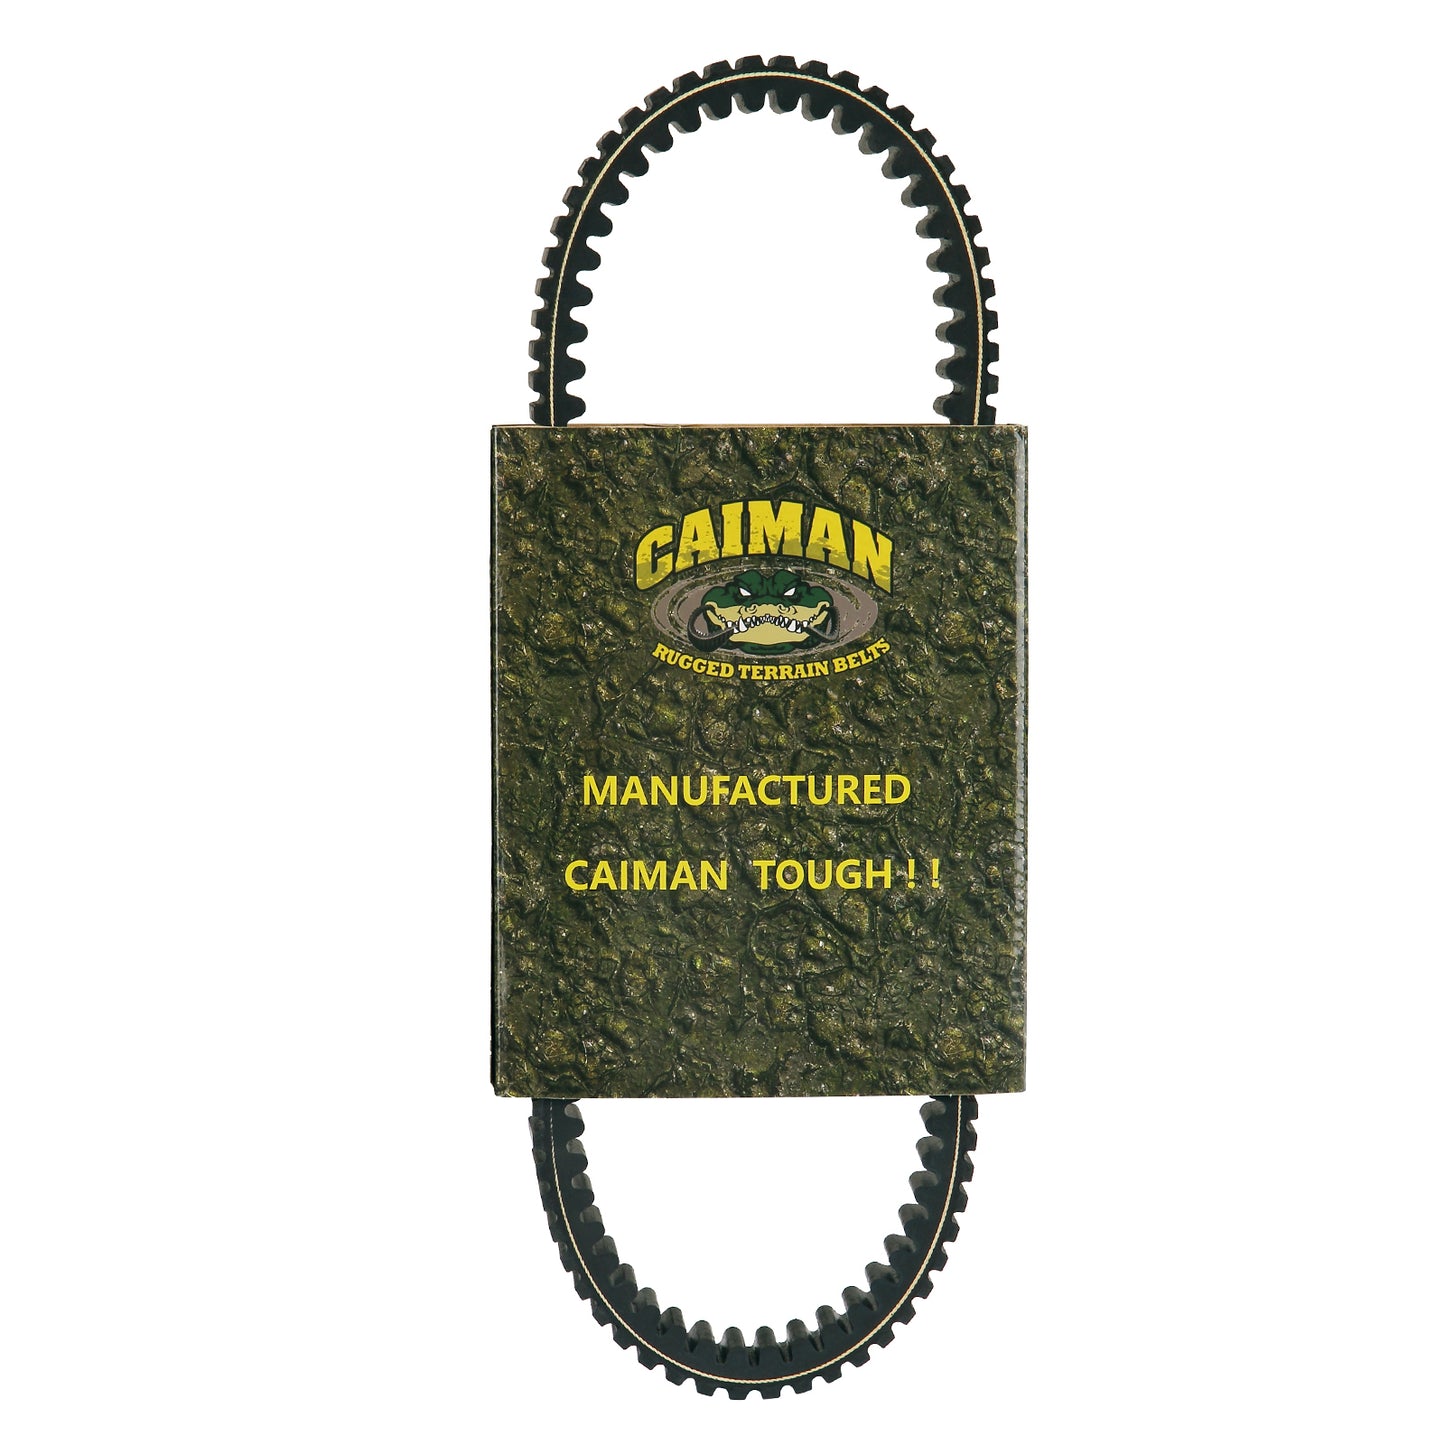 Automatic Continuously Variable Transmission (CVT) Belt Caiman Rugged Terrain CAM-28VS3982